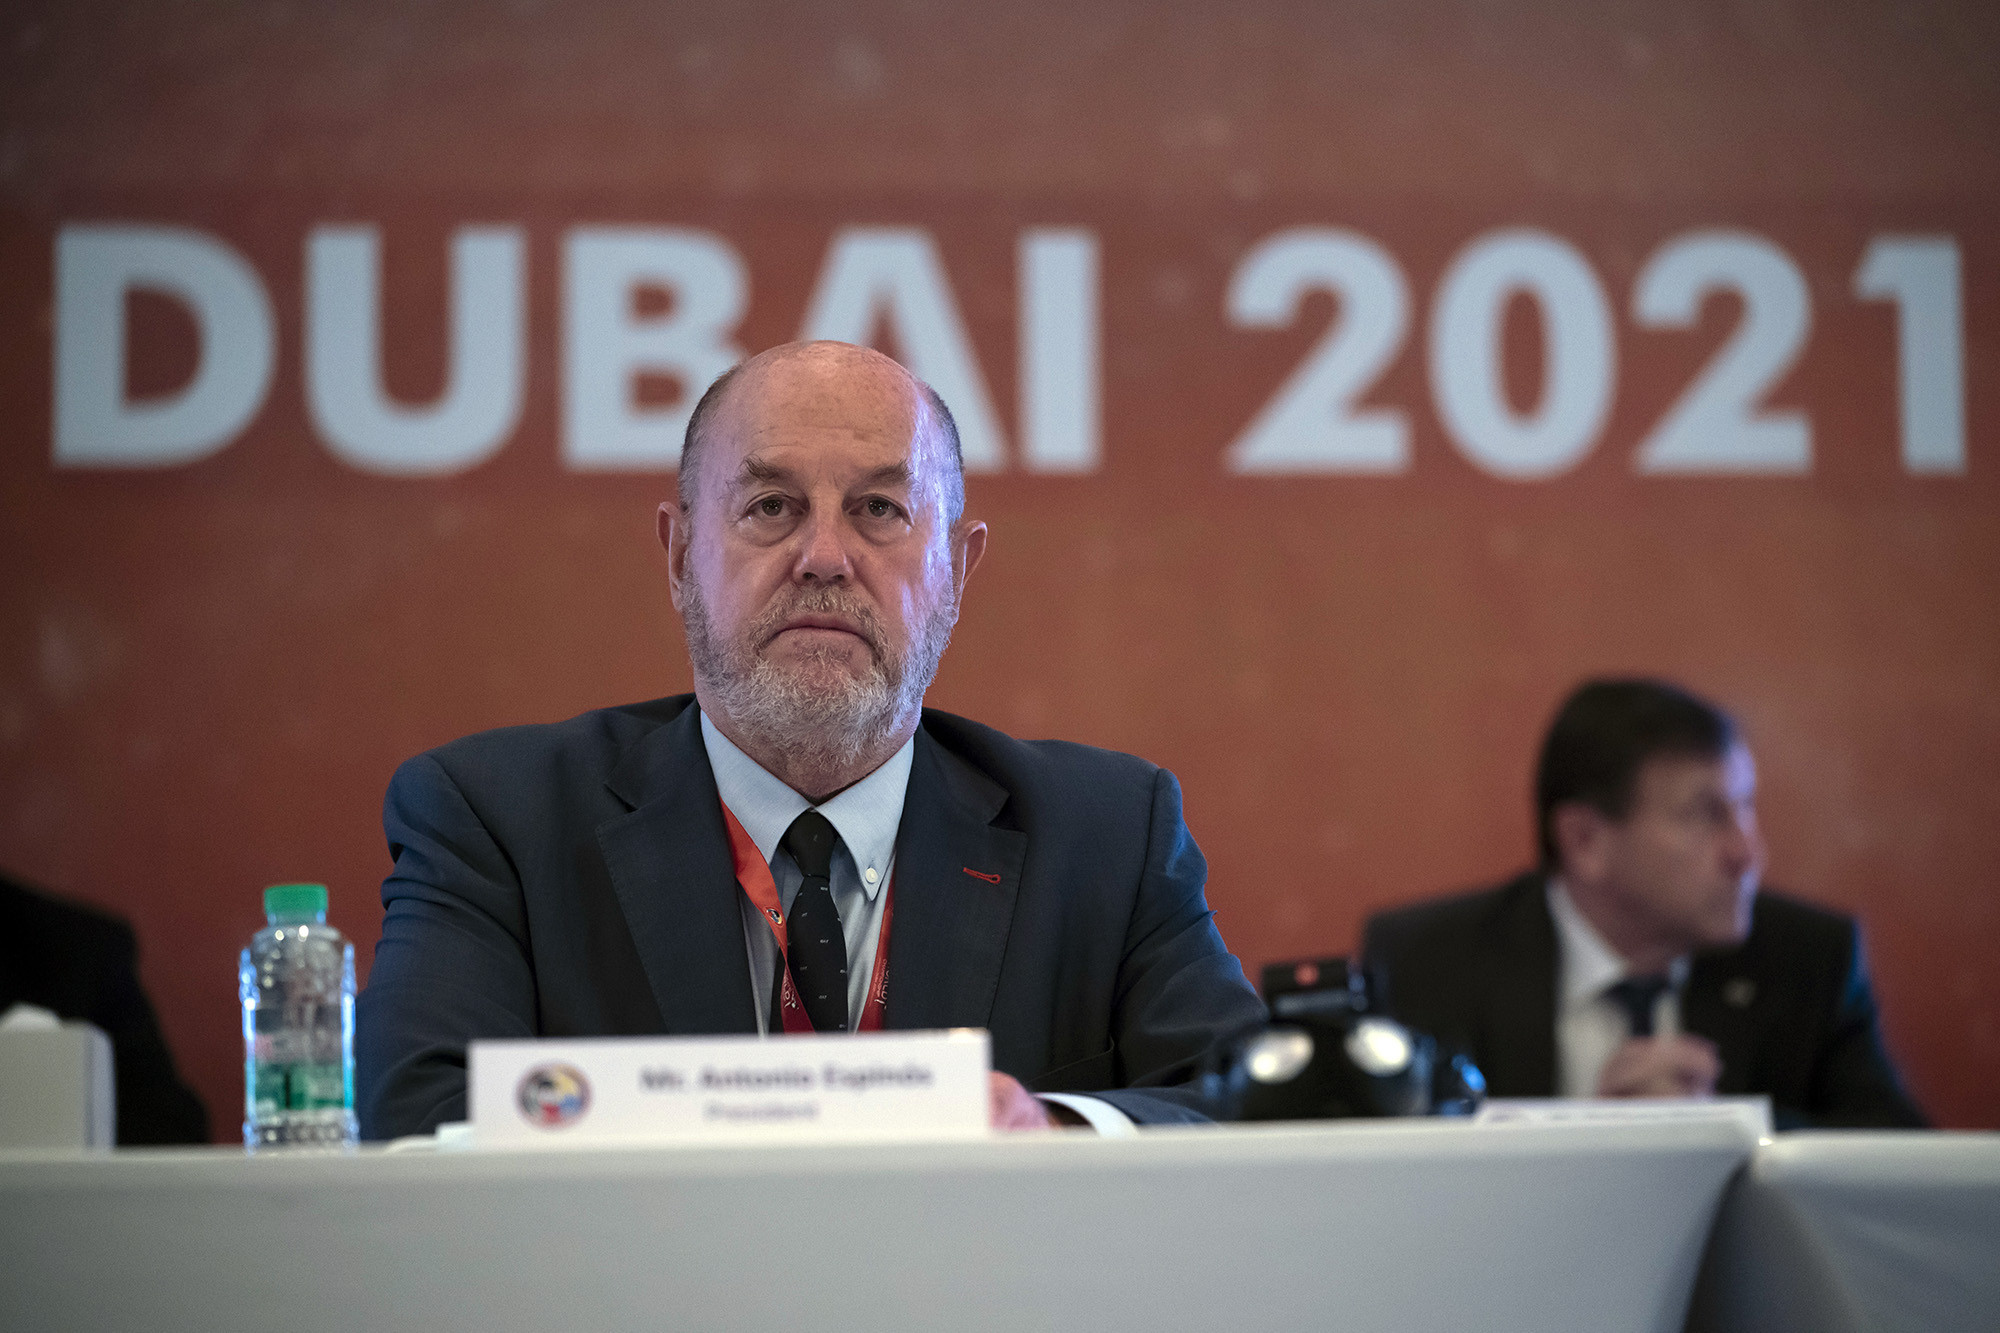 WKF President Antonio Espinós said the changes would be beneficial to the sport ©WKF